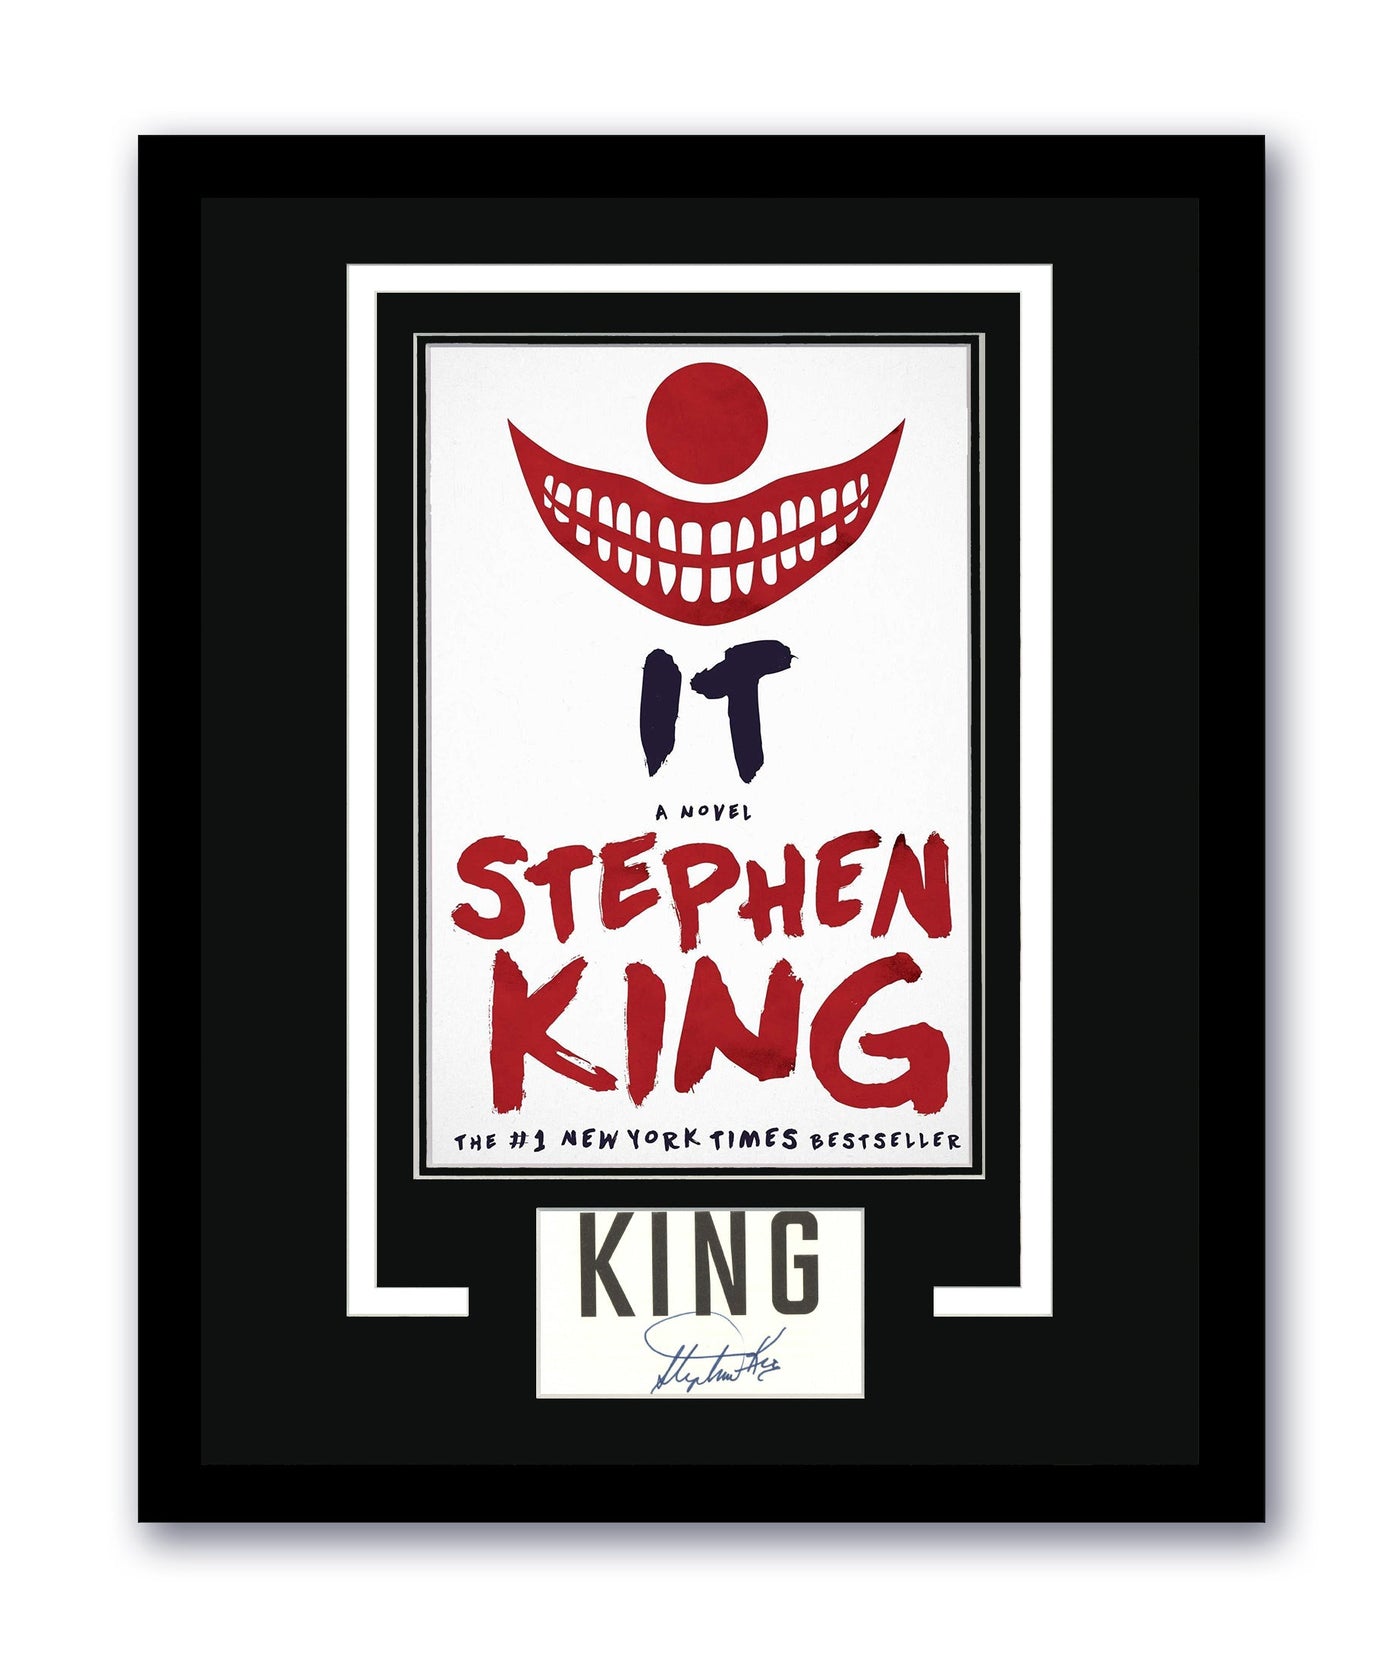 Stephen King Signed Cut Custom Framed 11x14 IT Pennywise Autographed ACOA #2